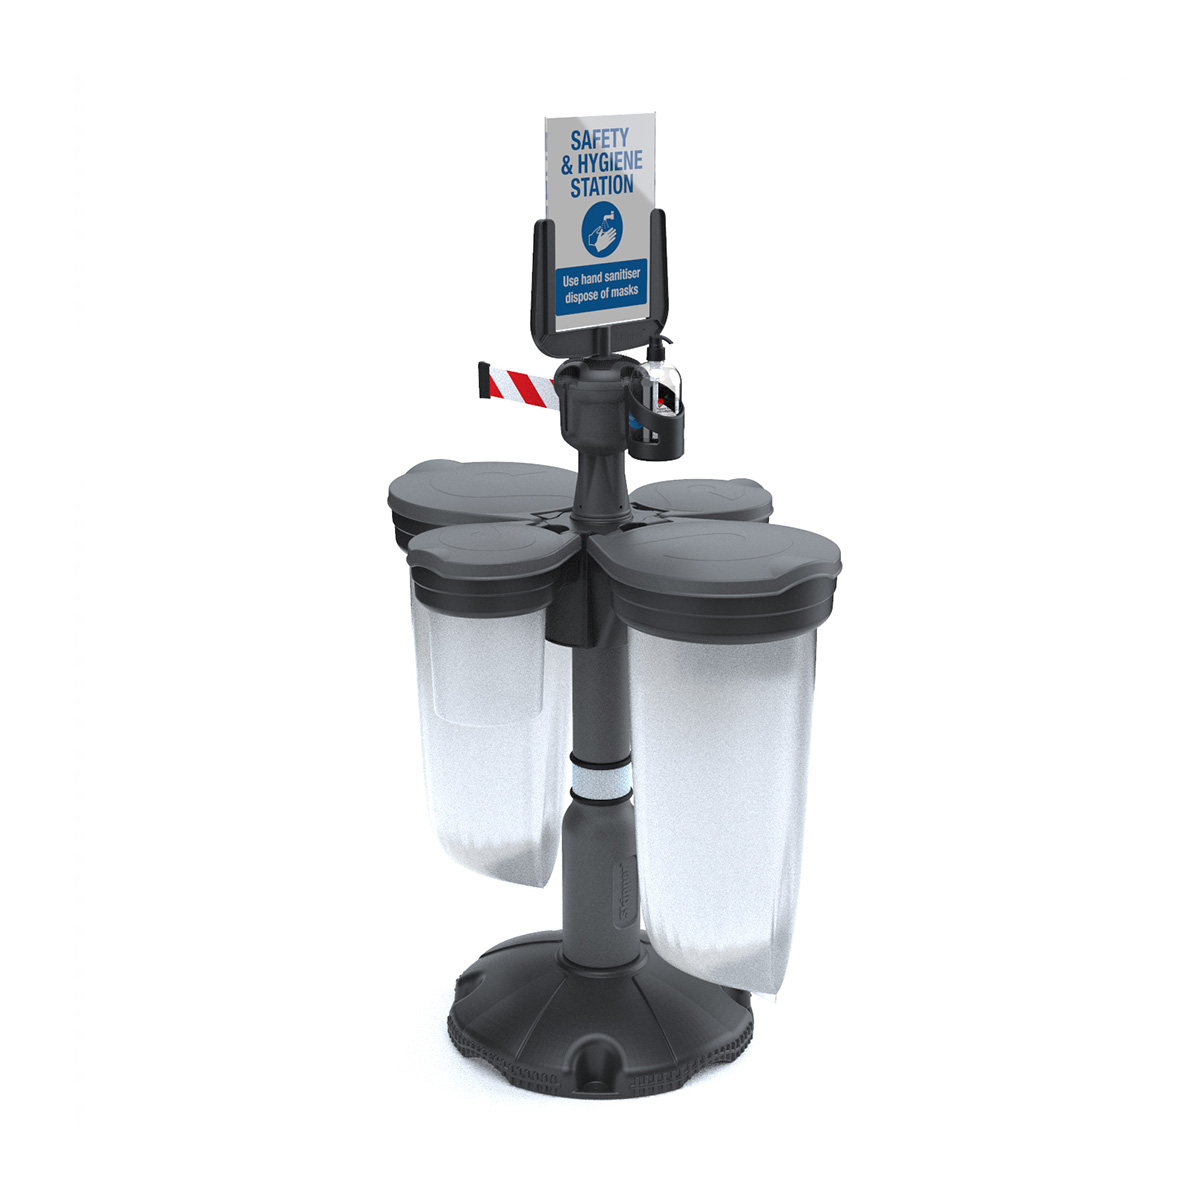 Skipper Retractable Belt And Safety Station 2  With Silver Posts And Bin Lids